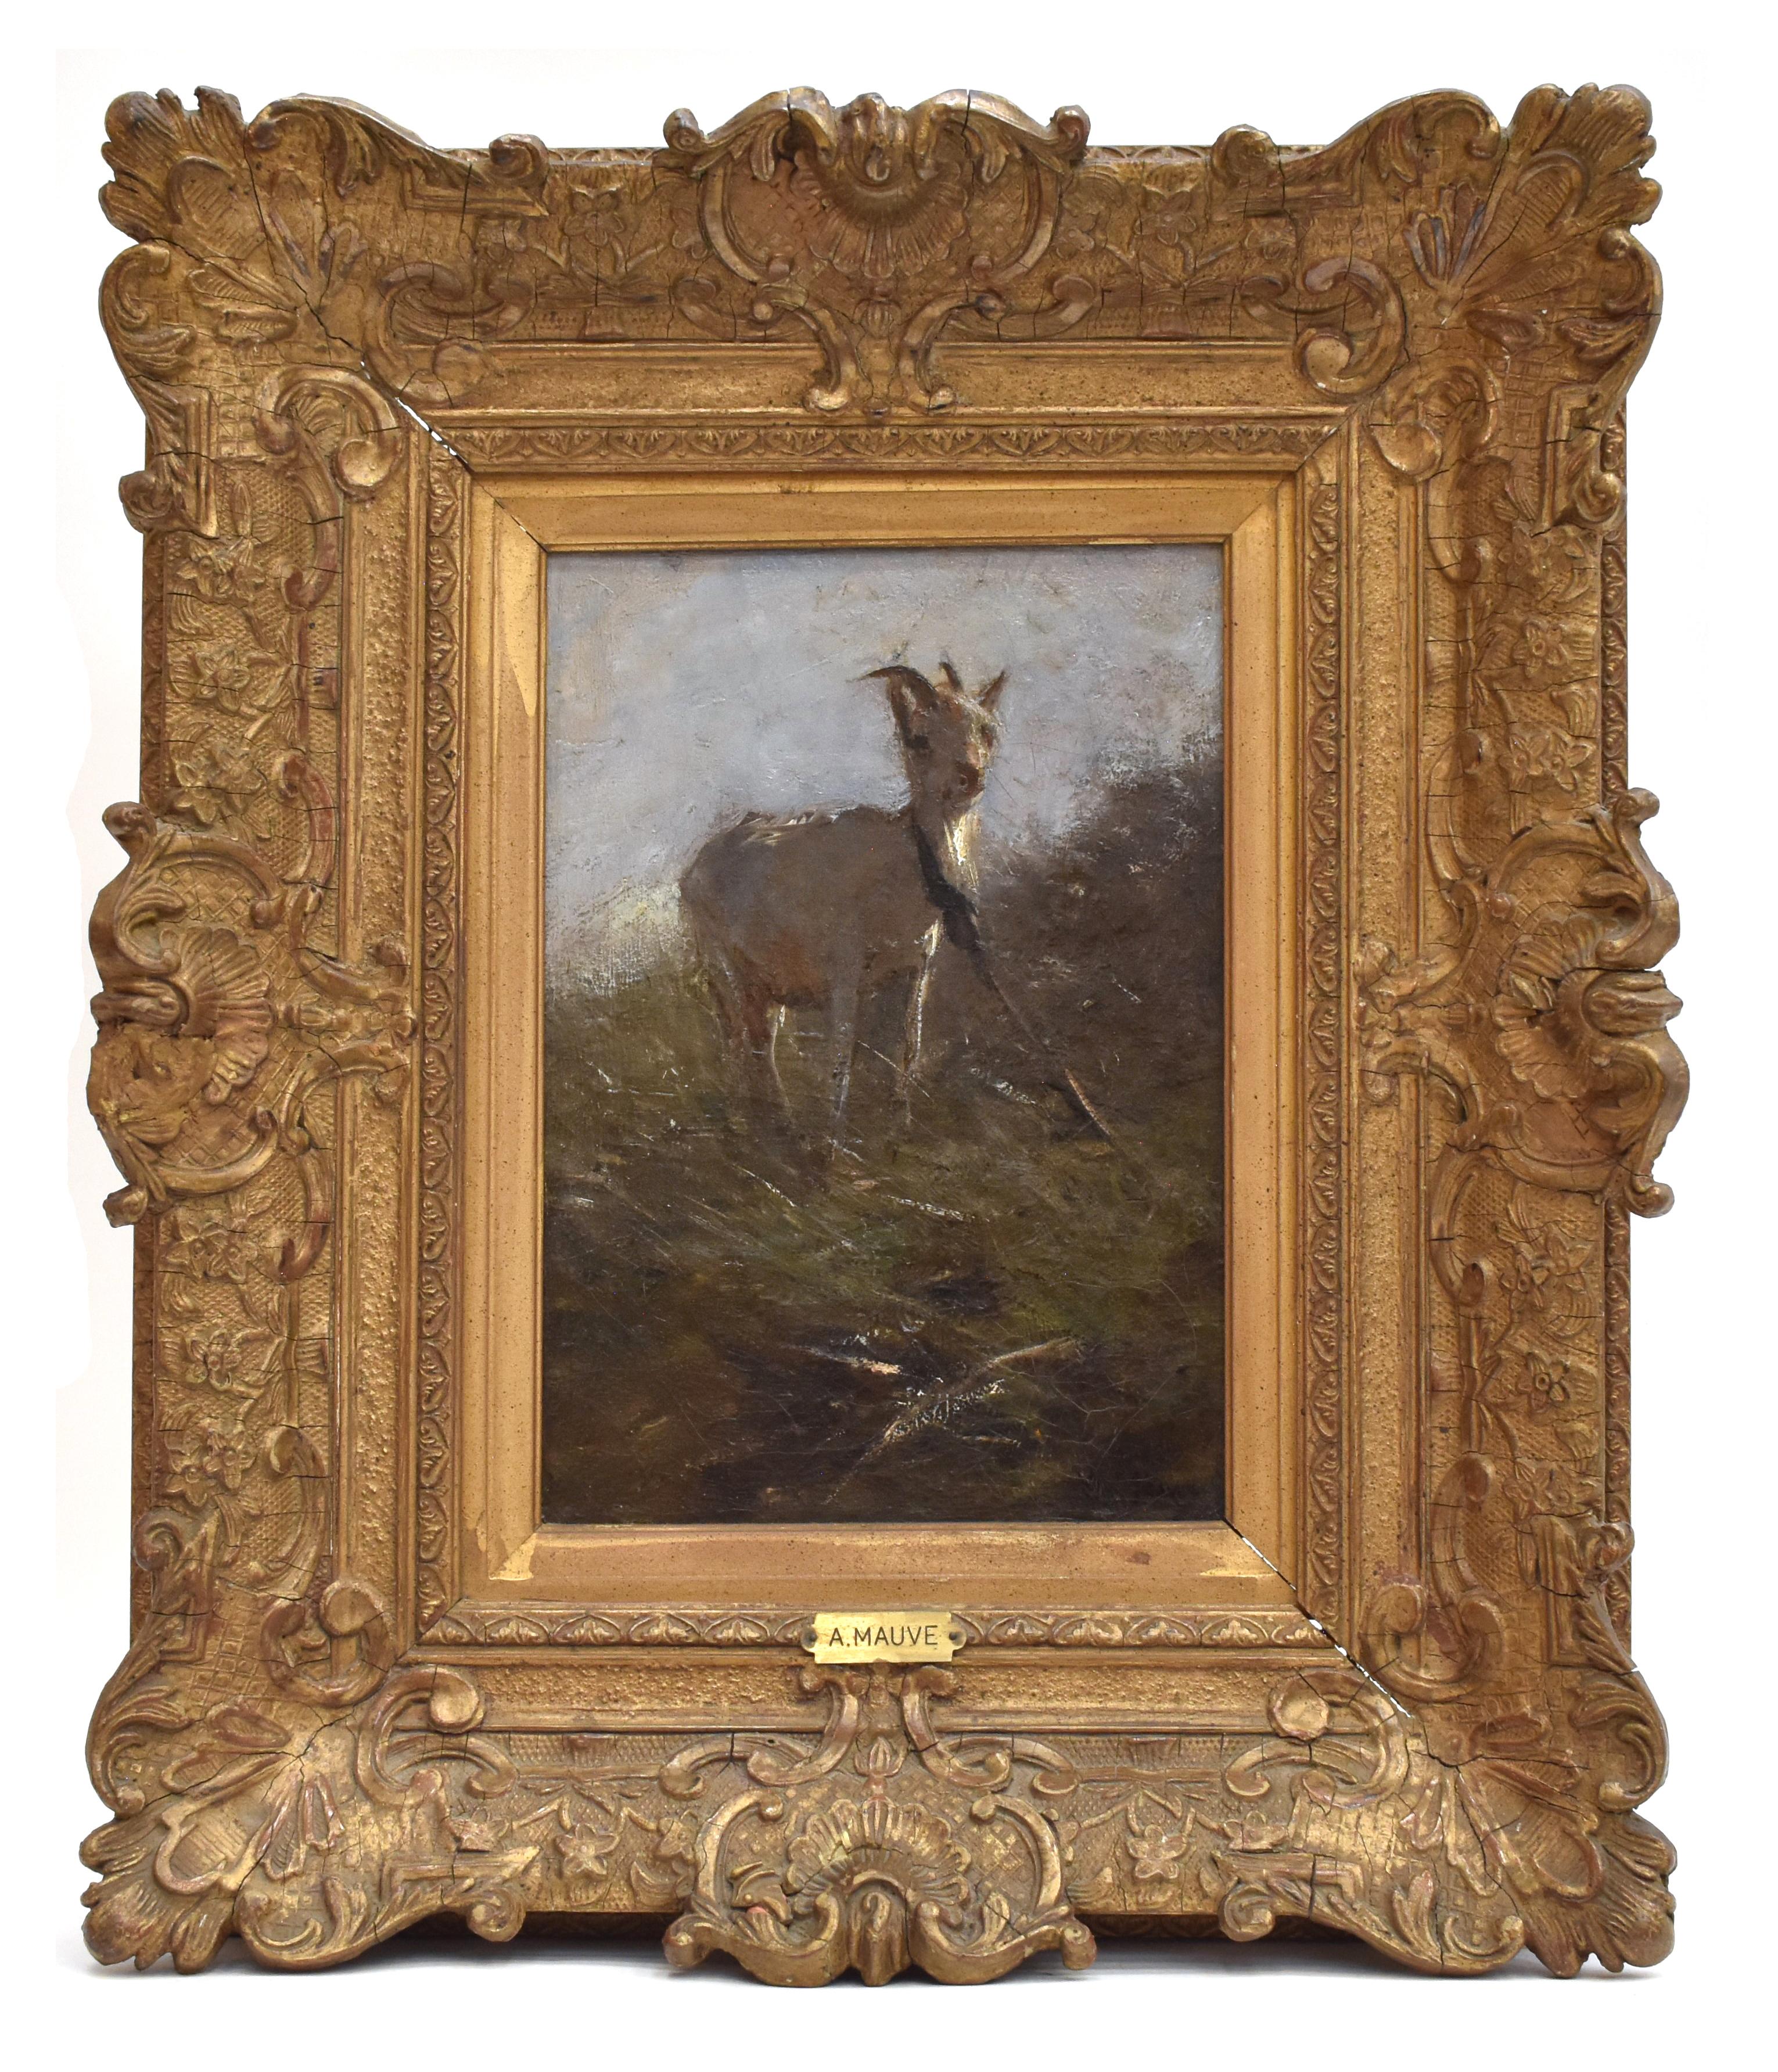 Anton Mauve Animal Painting - Goat in woods - Dutch artist, oil on canvas, animal and nature